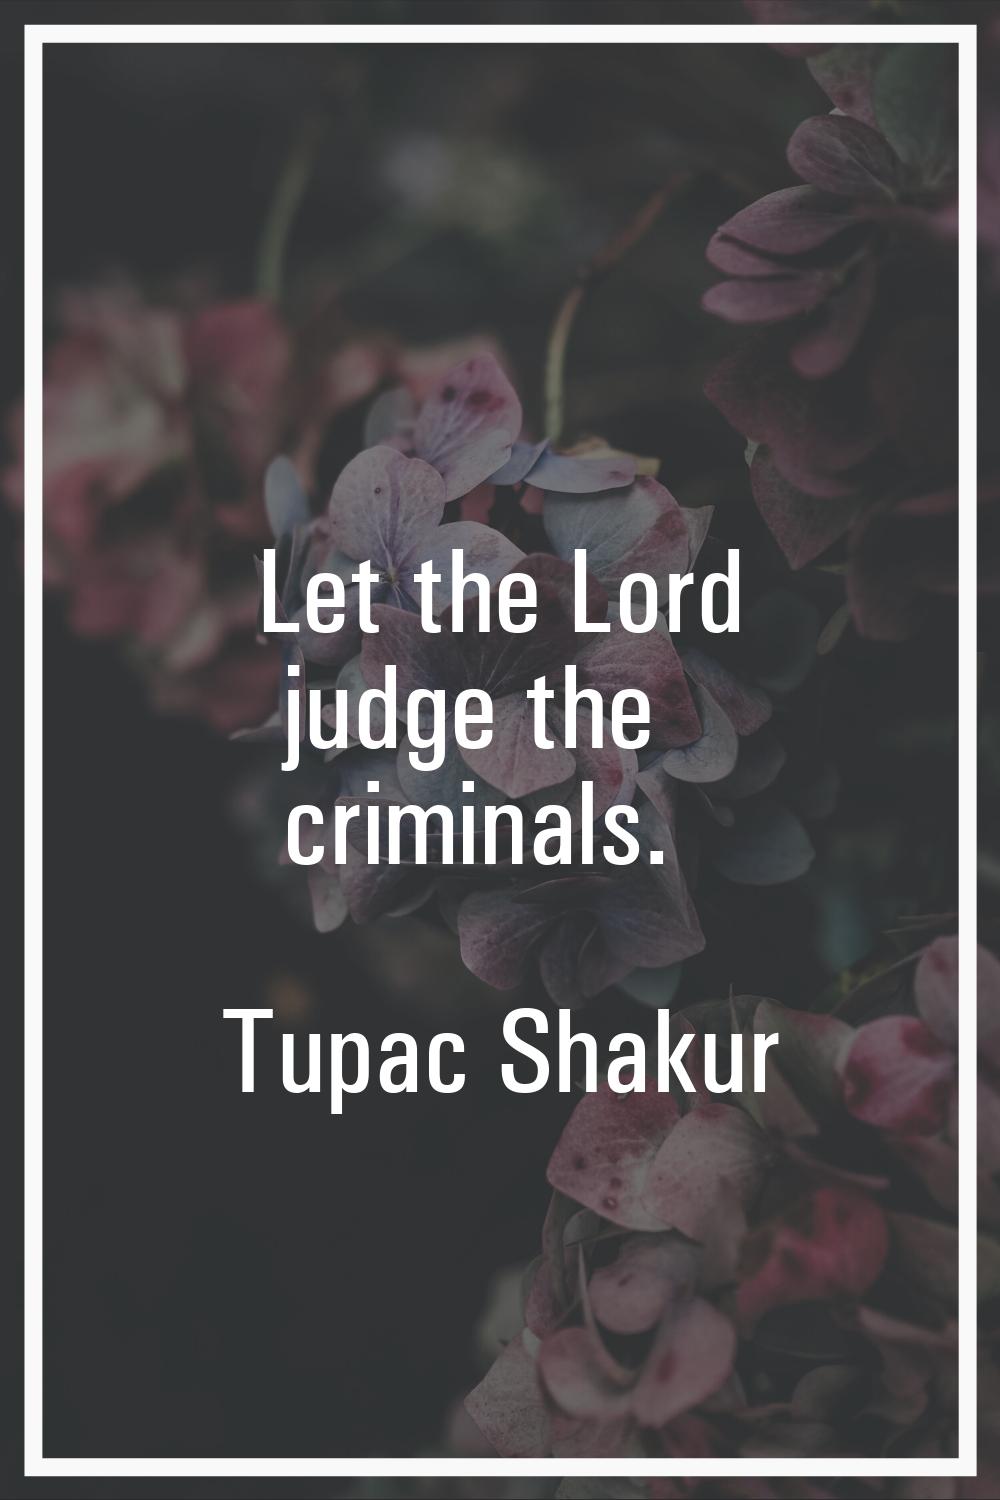 Let the Lord judge the criminals.